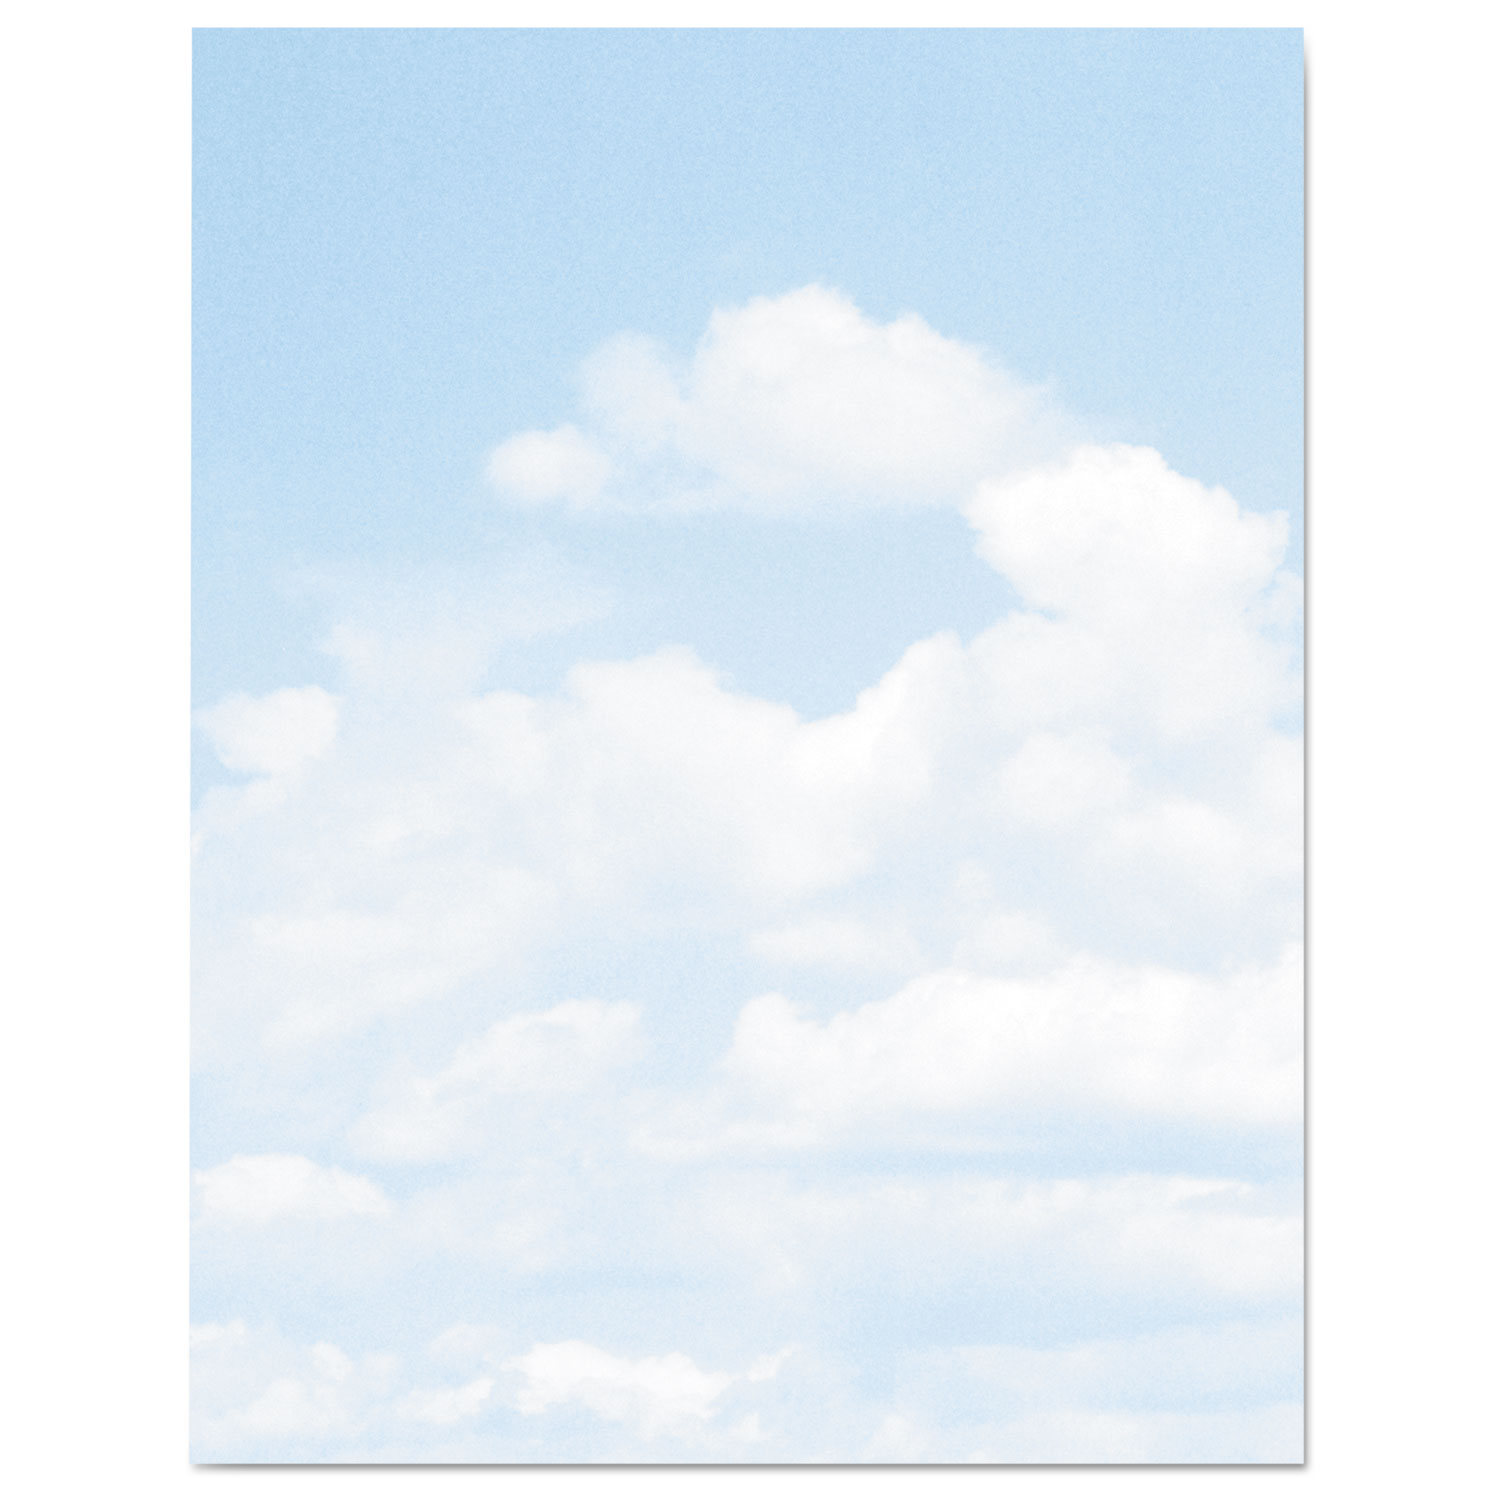 Design Suite Paper, 24 lbs., Clouds, 8 1/2 x 11, Blue/White, 100/Pack